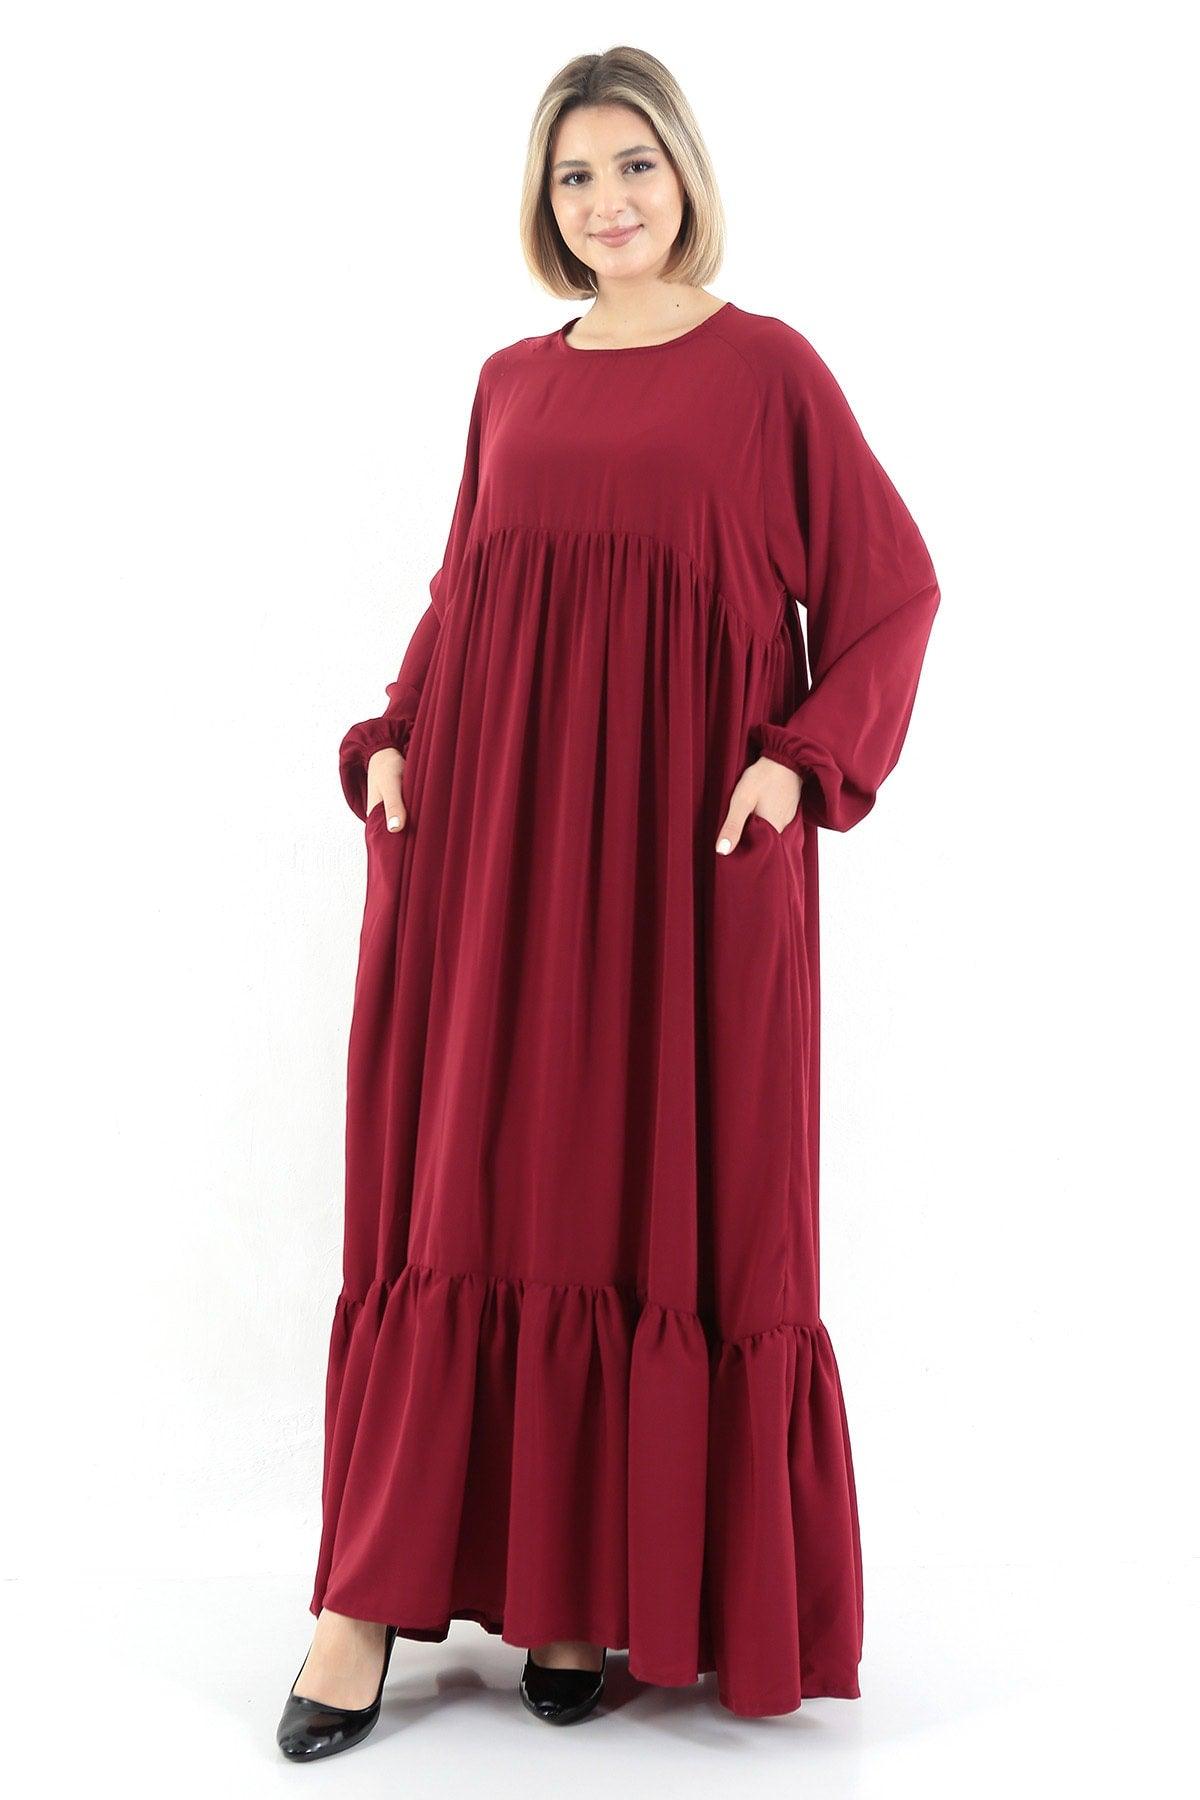 Claret Red Crew Neck Relaxed Fit Elastic Sleeve Side Pockets Pleated Robe Dress - Swordslife